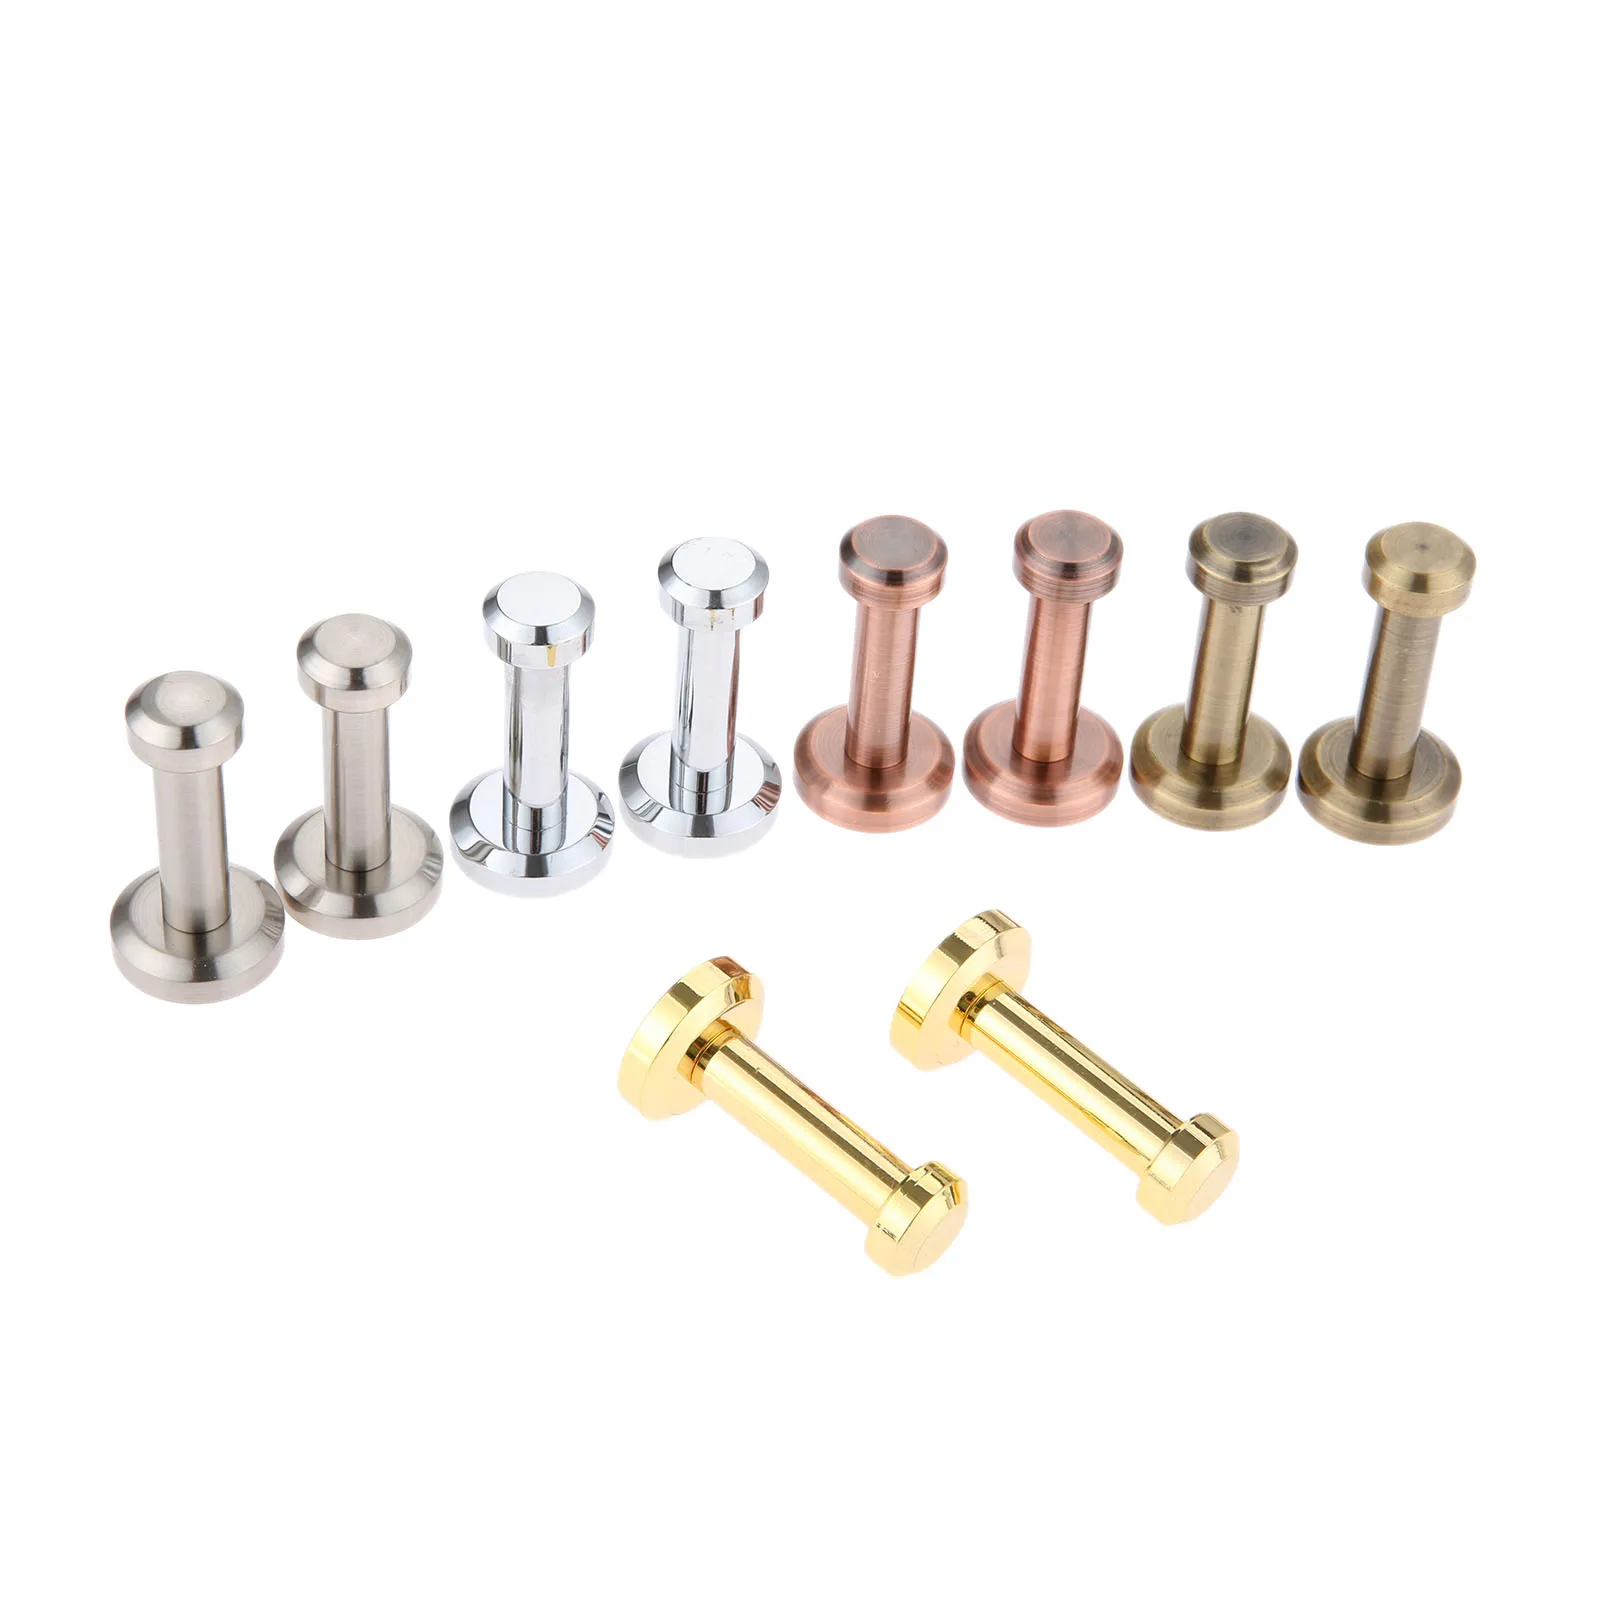 

2pcs Wall Mounted Coat Hooks w/screws Brass Hanger Brushed Colorful Plated 47mm/1.85Inch Modern Simple Bathroom Kitchen Bedroom